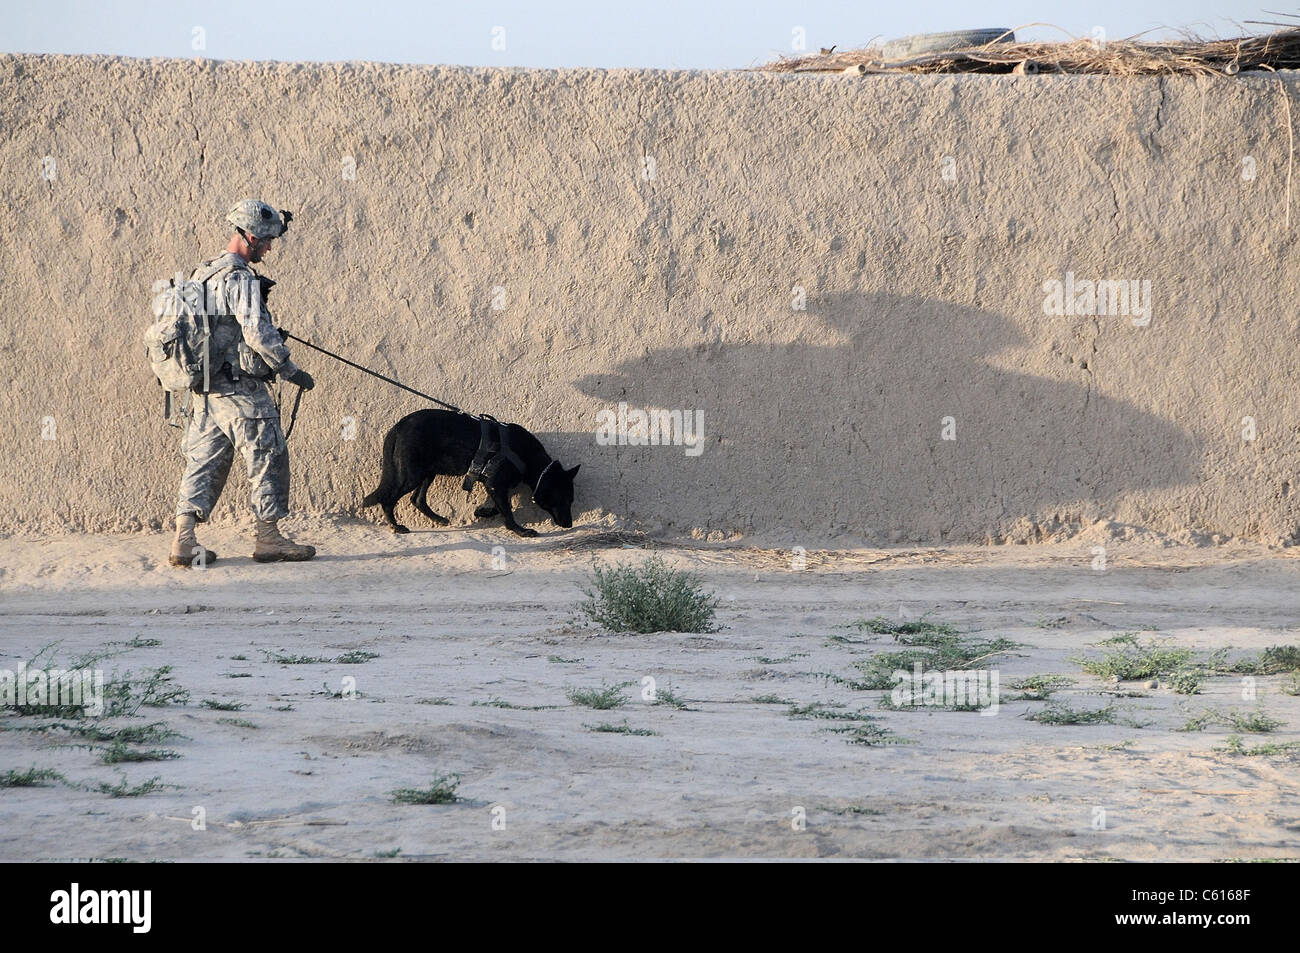 US Army working dog team conducts a patrol in the Zhari district of Kandahar province Afghanistan April 21 2011. Stock Photo